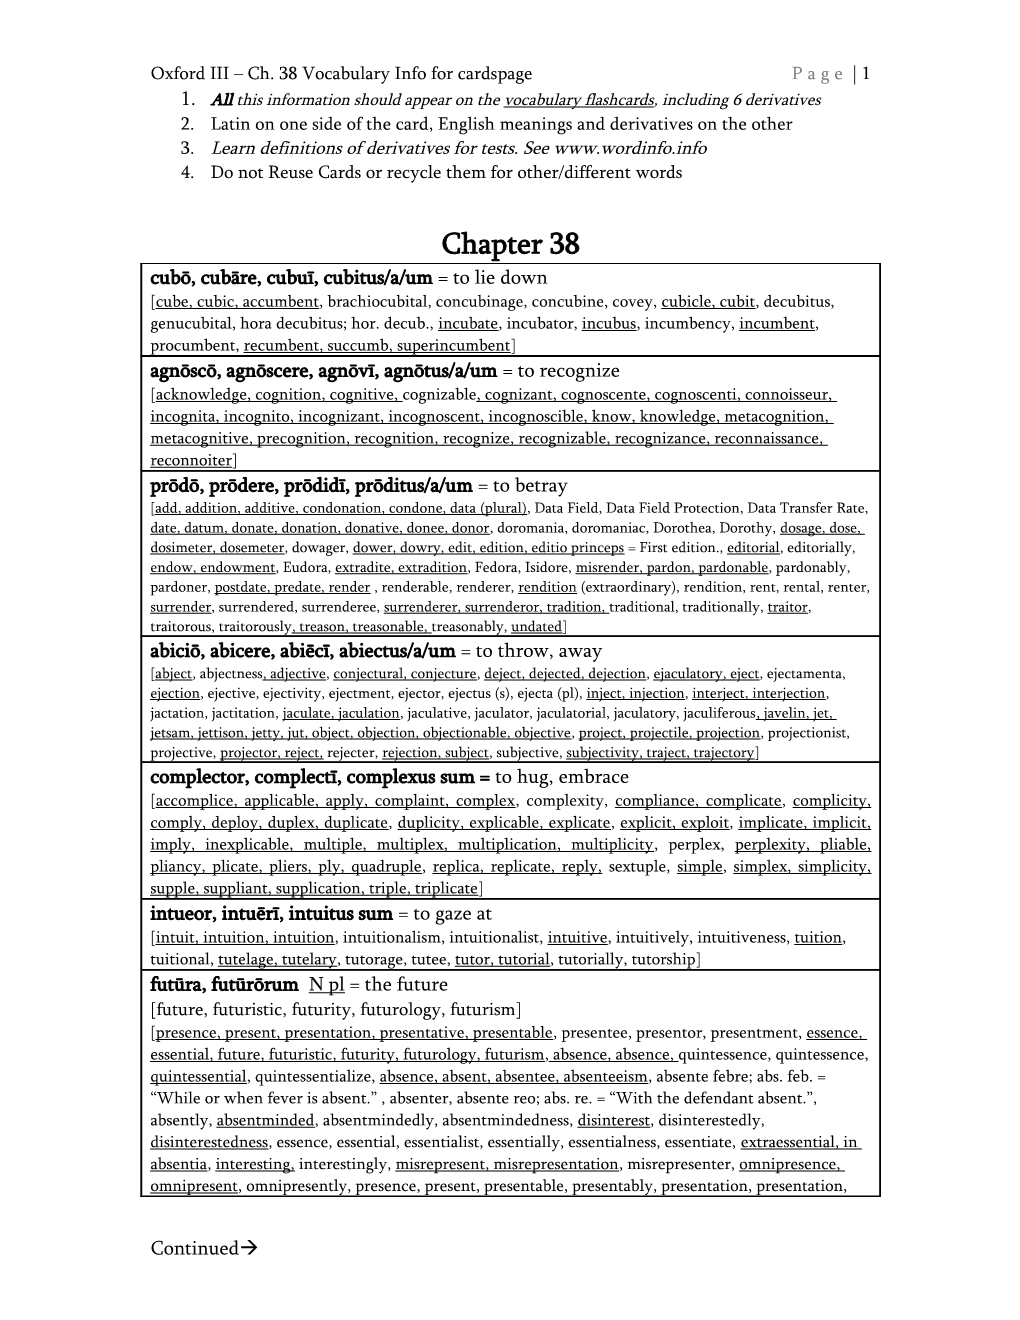 Oxford III Ch. 38 Vocabulary Info for Cards Page Page 5